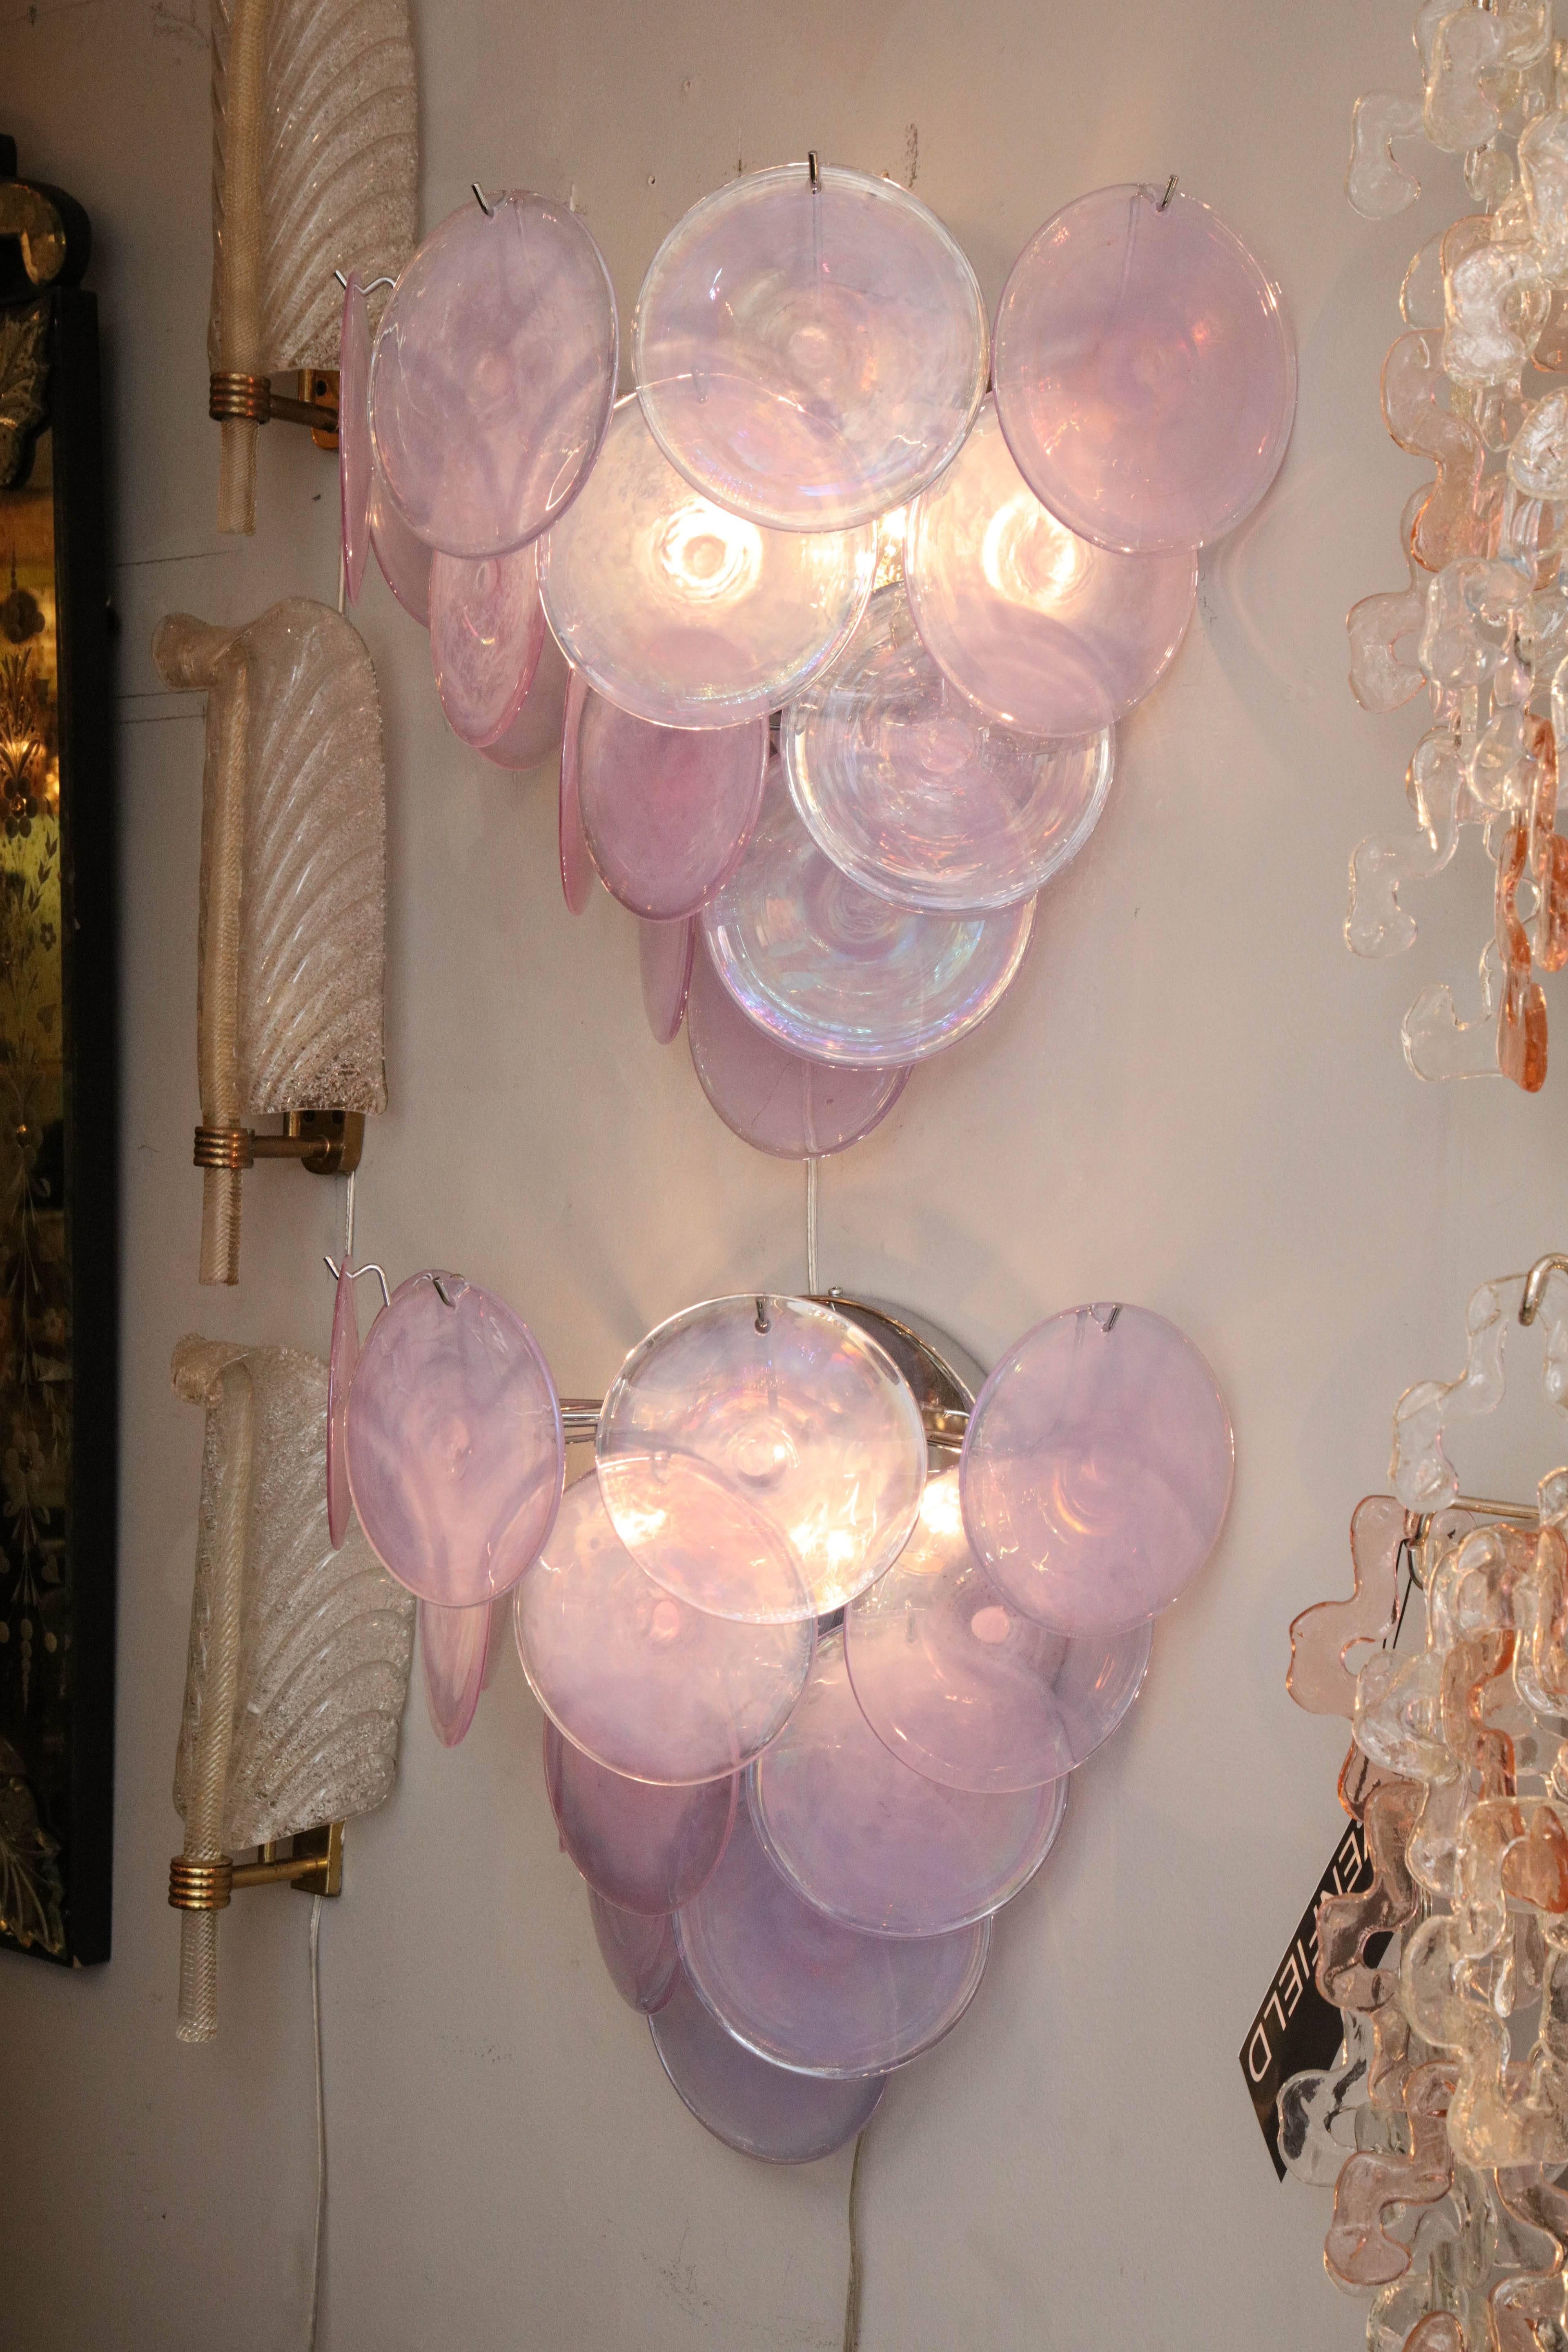 Made-to-order Alex Iridescent Murano glass disc sconces. Orders are available for different glass colors, sizes, and finishes.